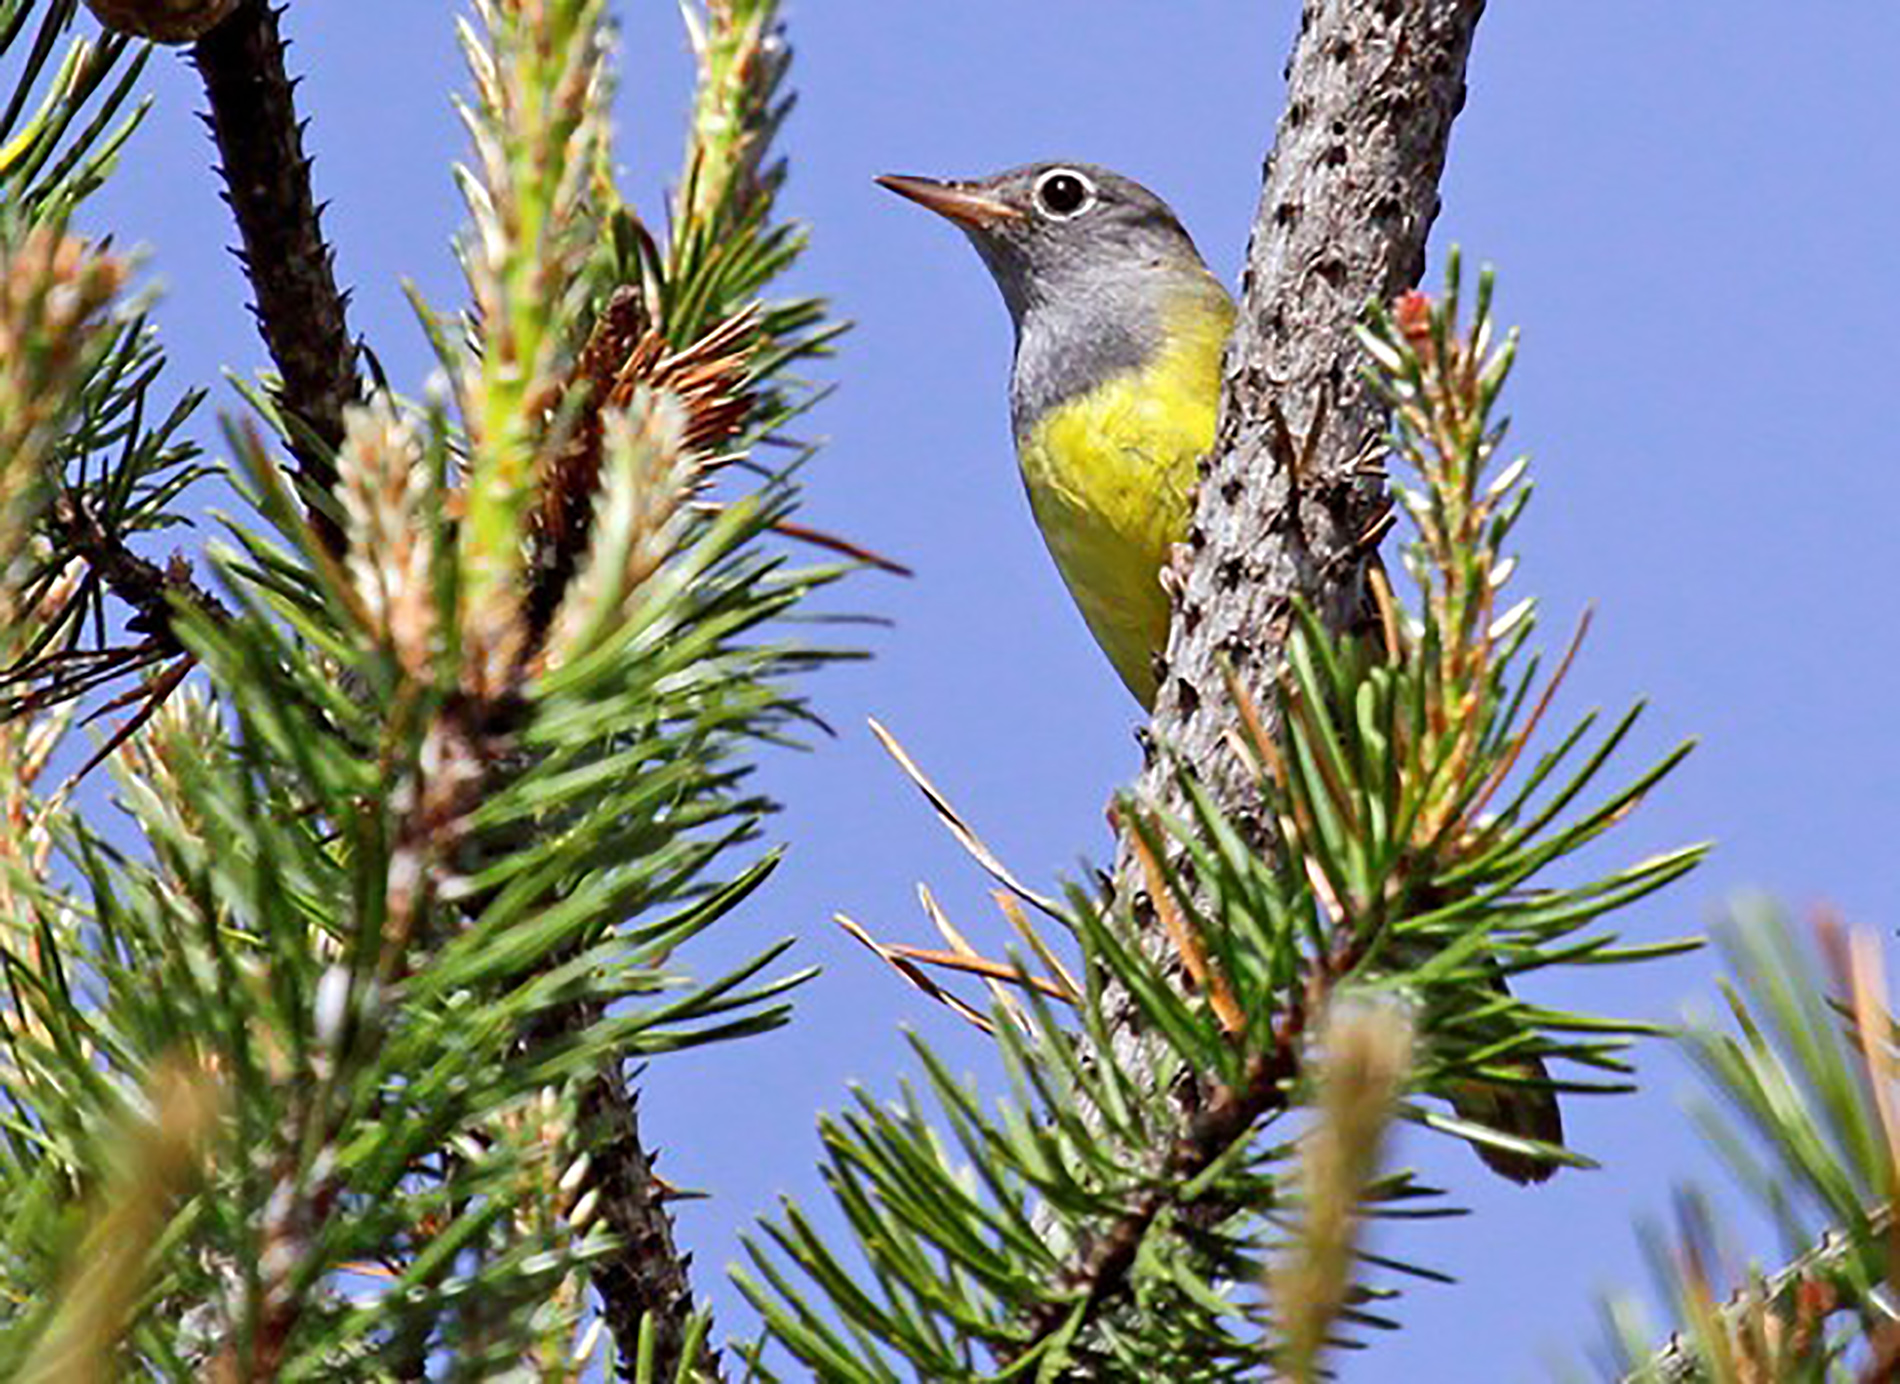 Conservationists aim to protect songbird in Wisconsin as its population sees steep decline